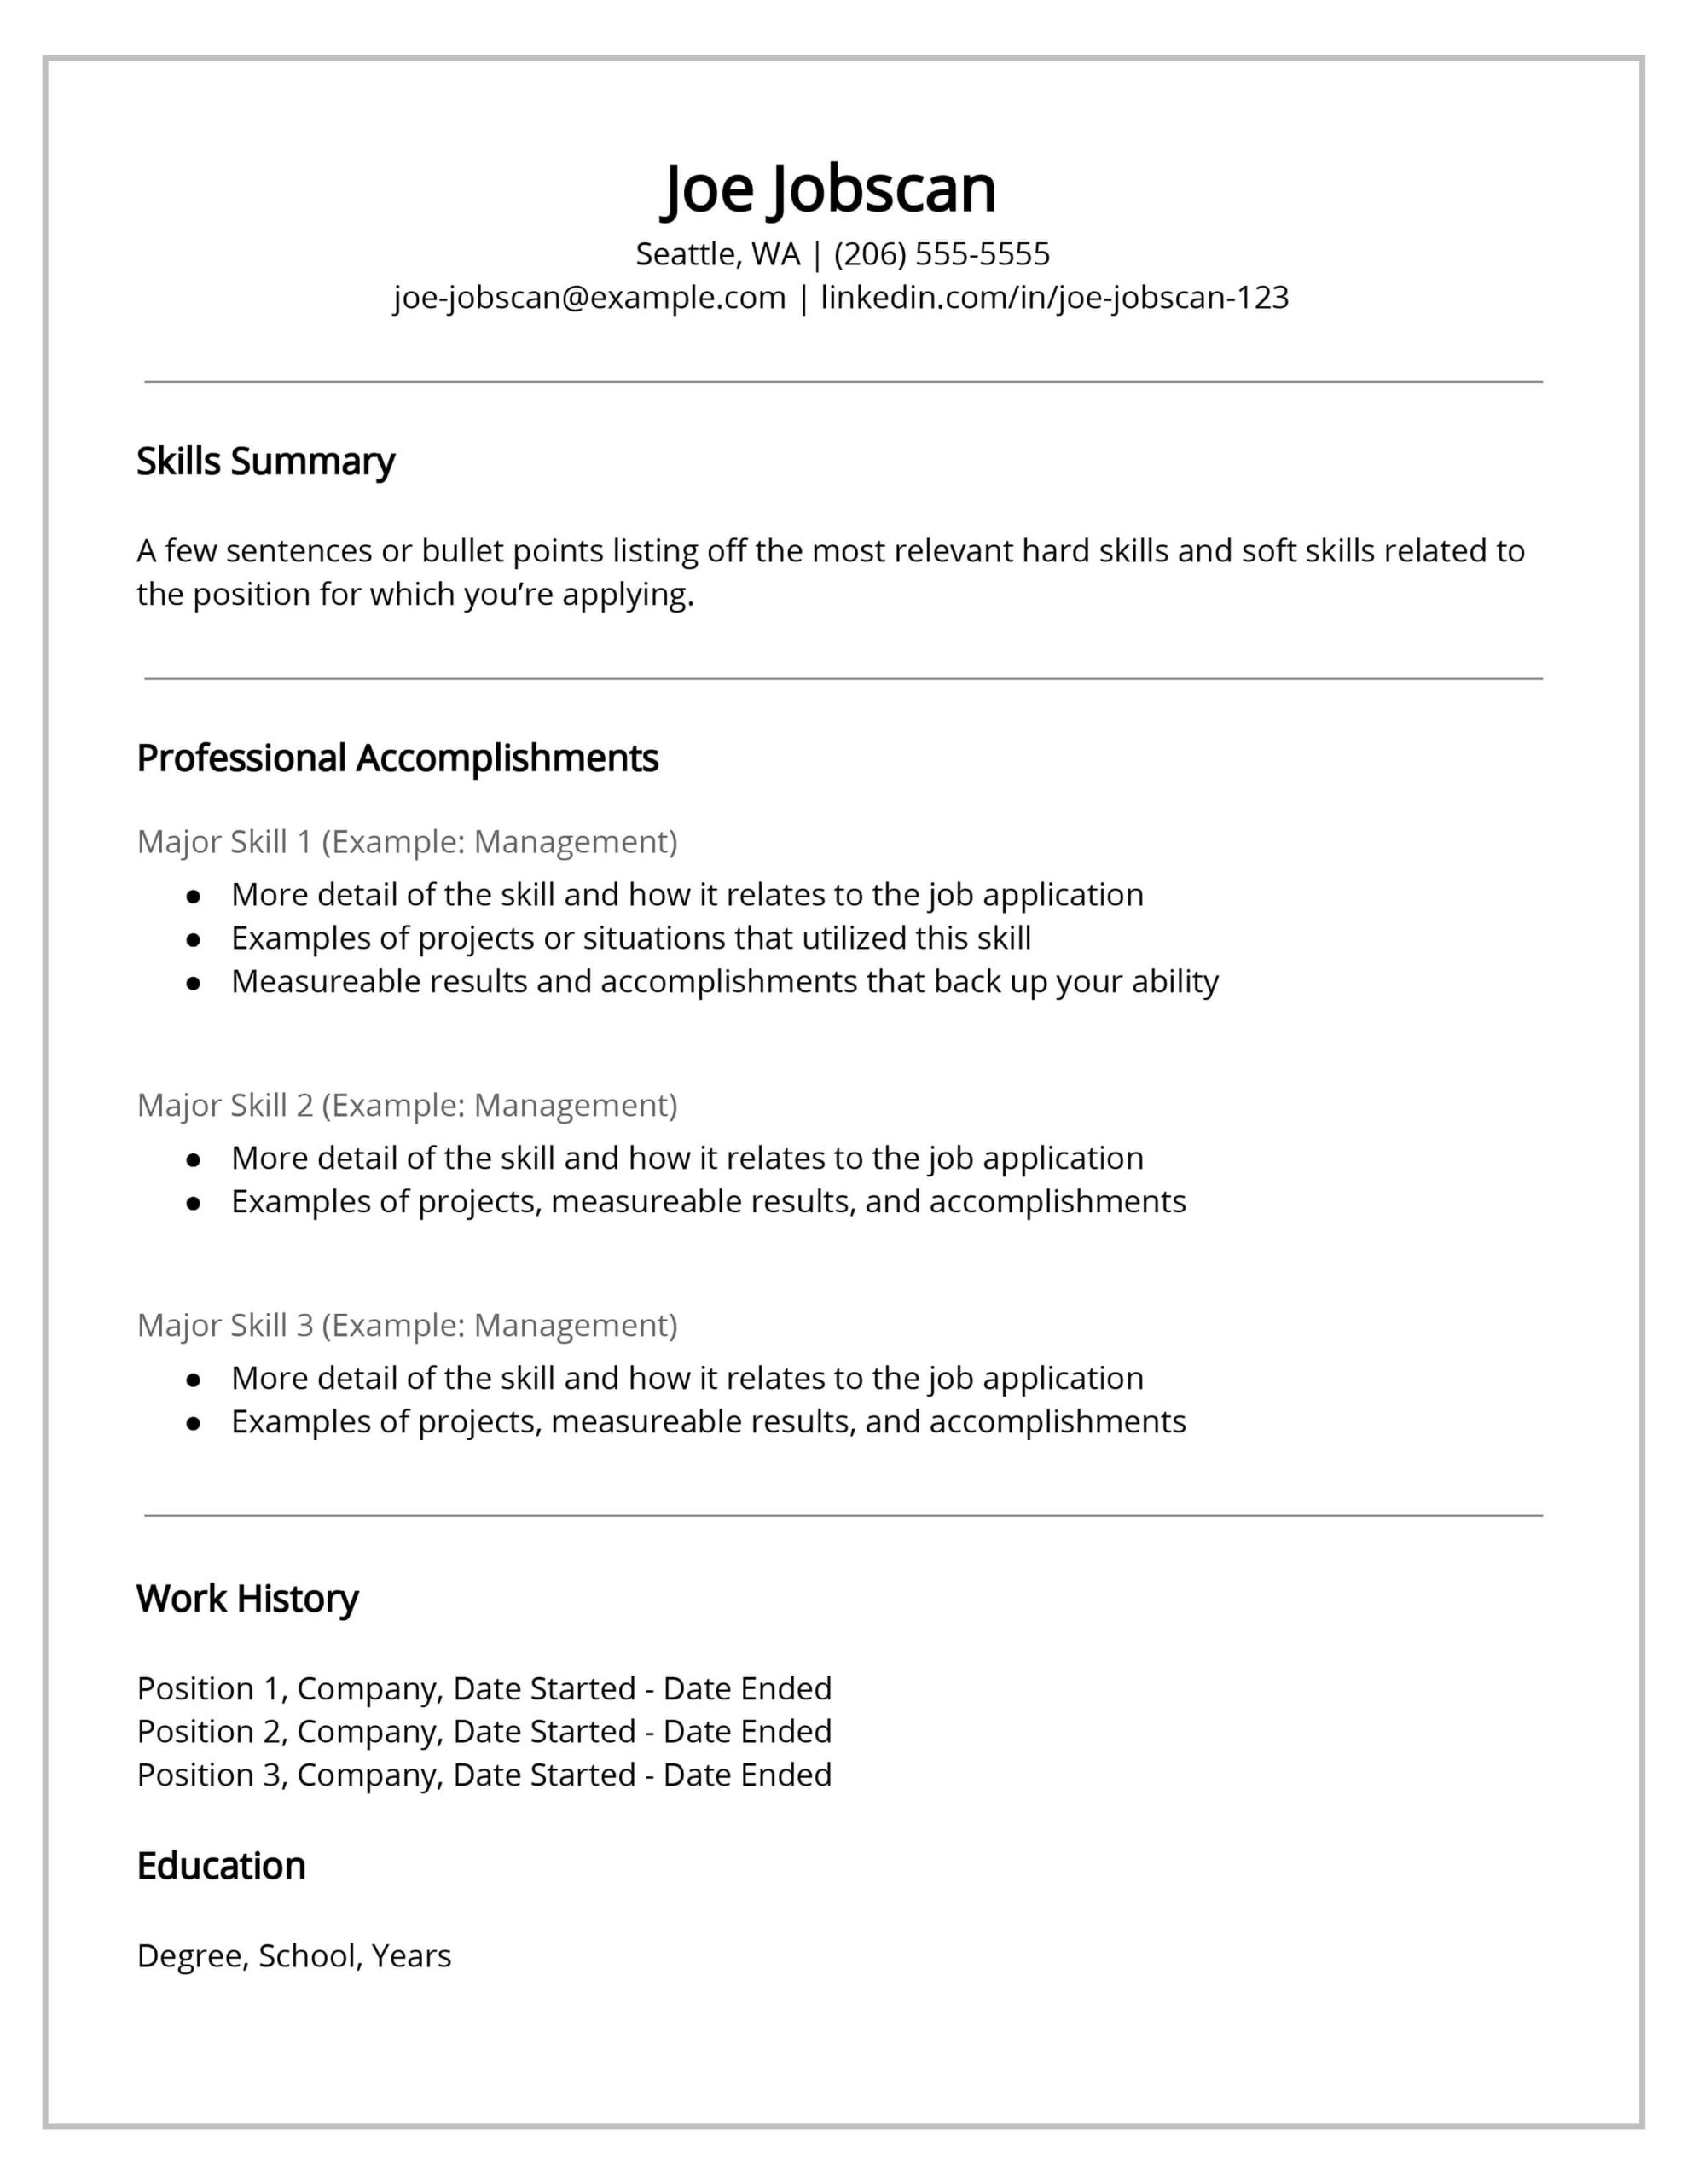 Sample Resume with No Employment Dates Recruiters Hate the Functional Resume formatâdo This Instead